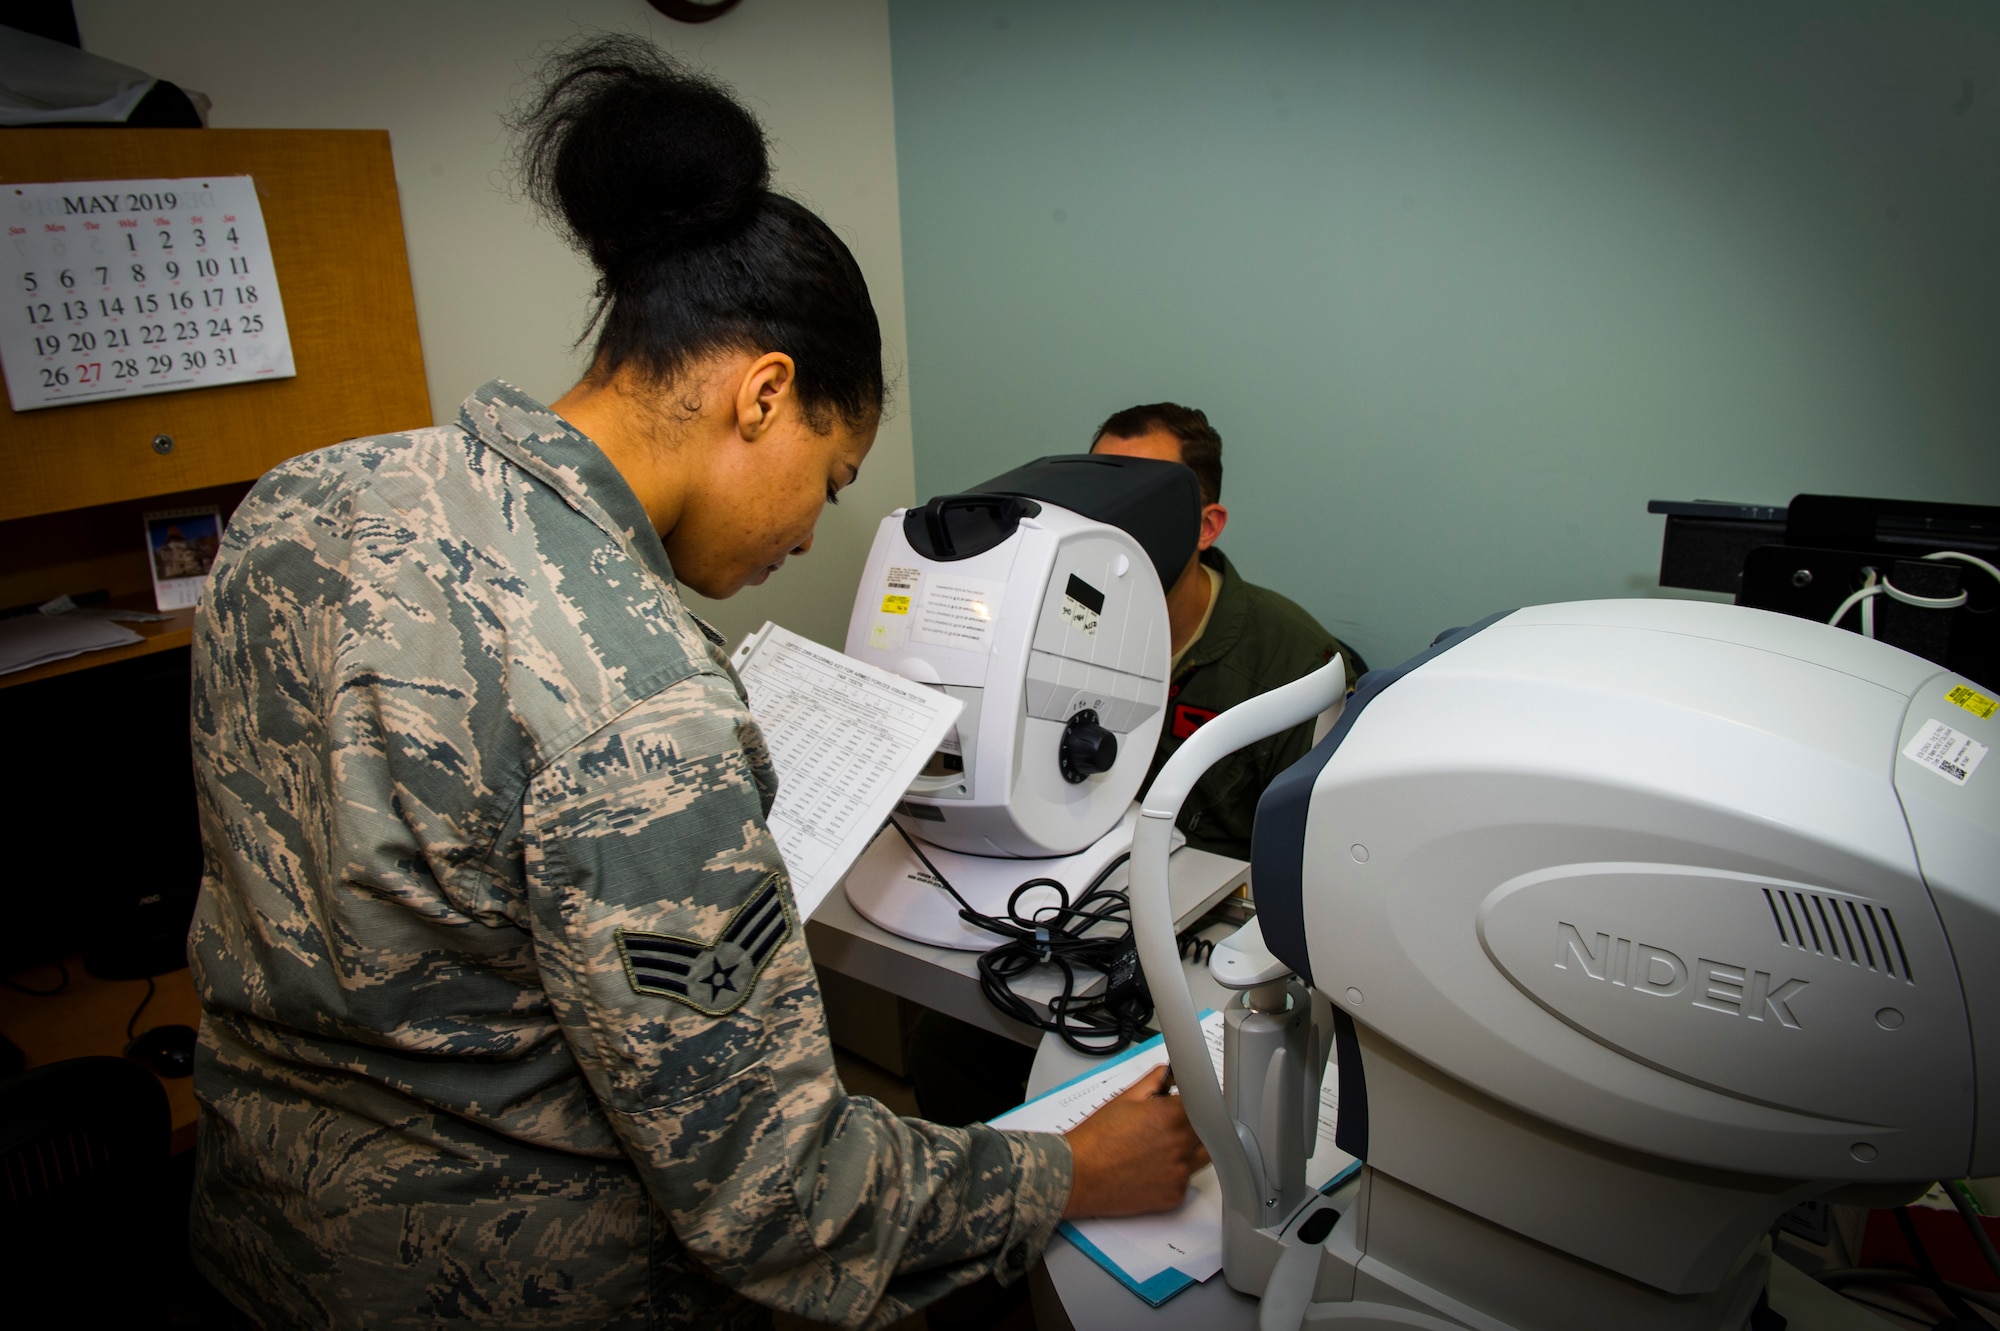 U.S. Air Force Senior Airman Rayne Patton, 926th Aerospace Medicine Squadron optical technician, reads a visual chart to a patient inside the medical clinic, July 13, 2019 at Nellis Air Force Base, Nev. The 926 AMDS provides direct medical support to Reserve Airmen to maintain operational readiness. (U.S. Air Force photo/Senior Airman Brett Clashman)